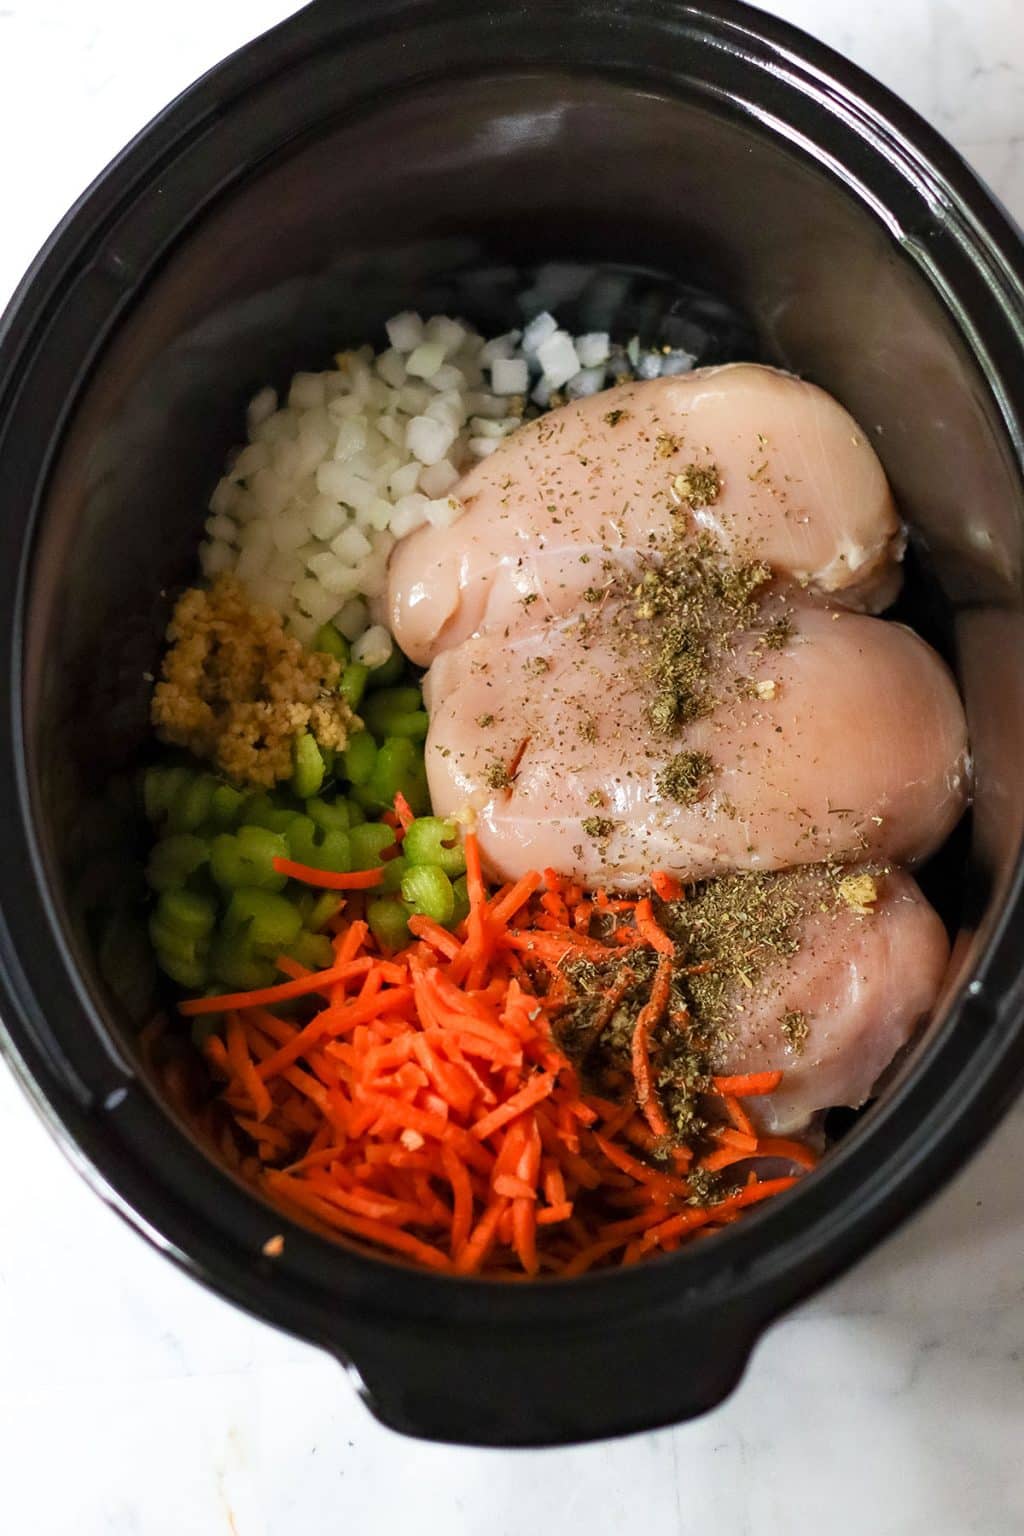 Can you put Raw Chicken in the Slow Cooker?